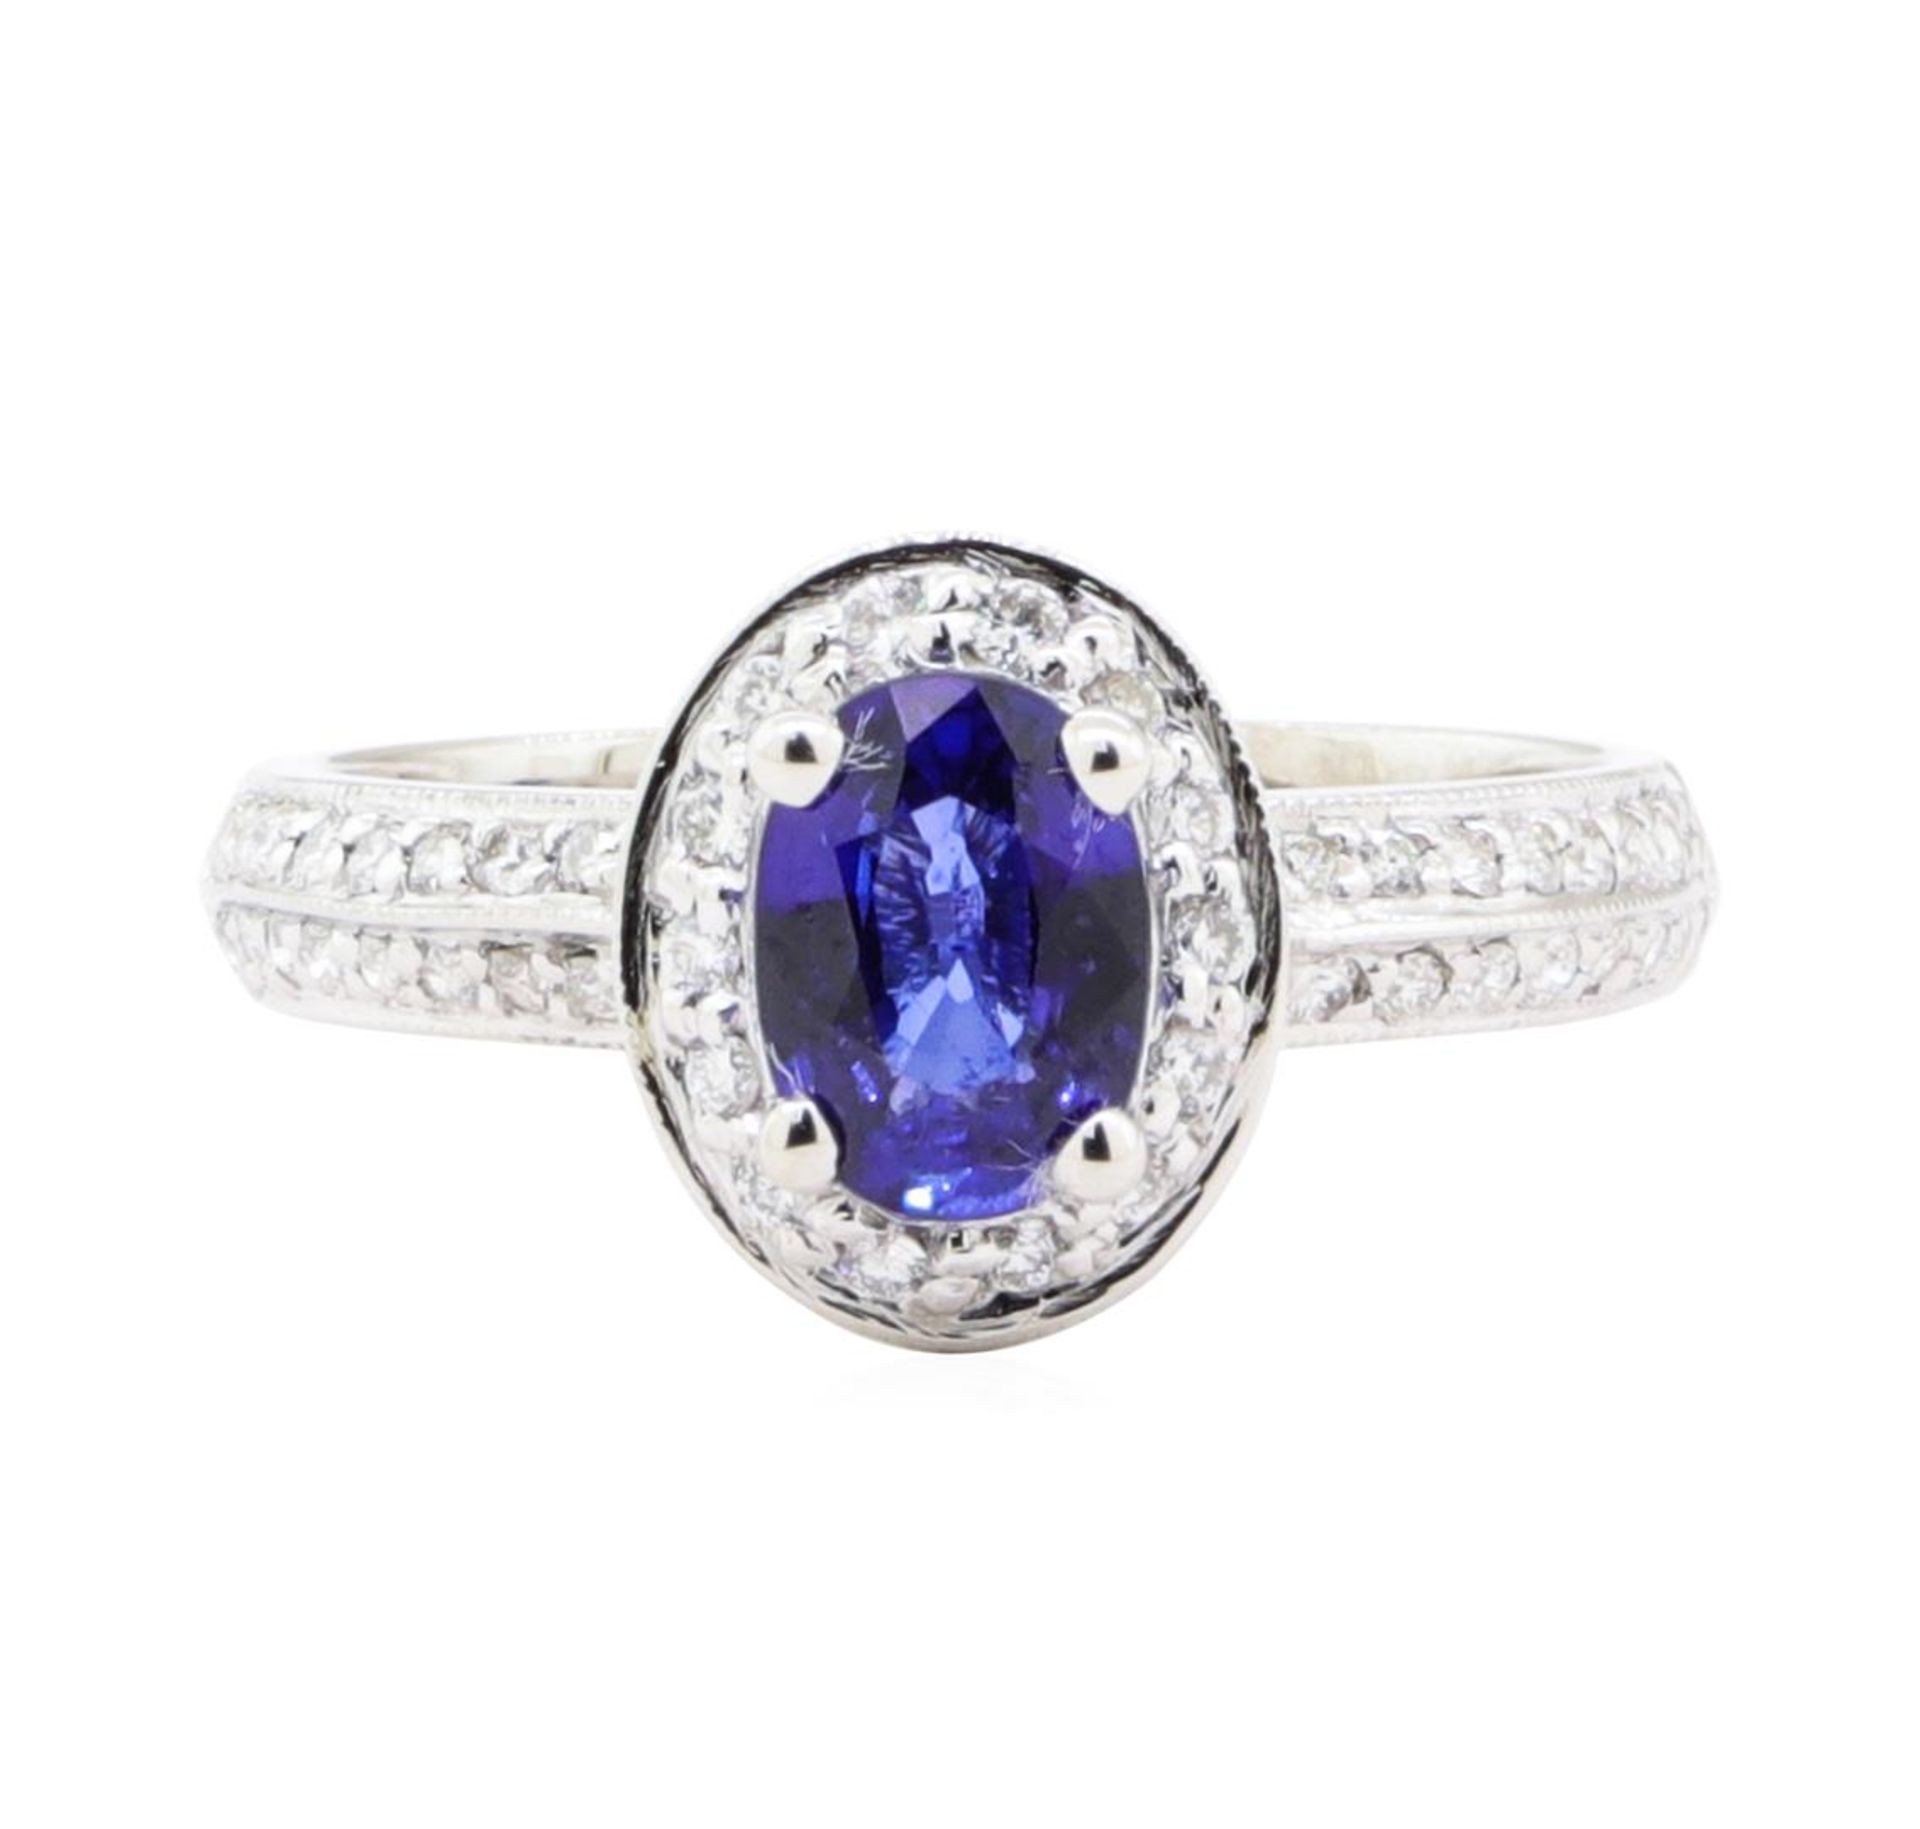 1.35 ctw Sapphire And Diamond Ring - 14KT White Gold - Image 2 of 5